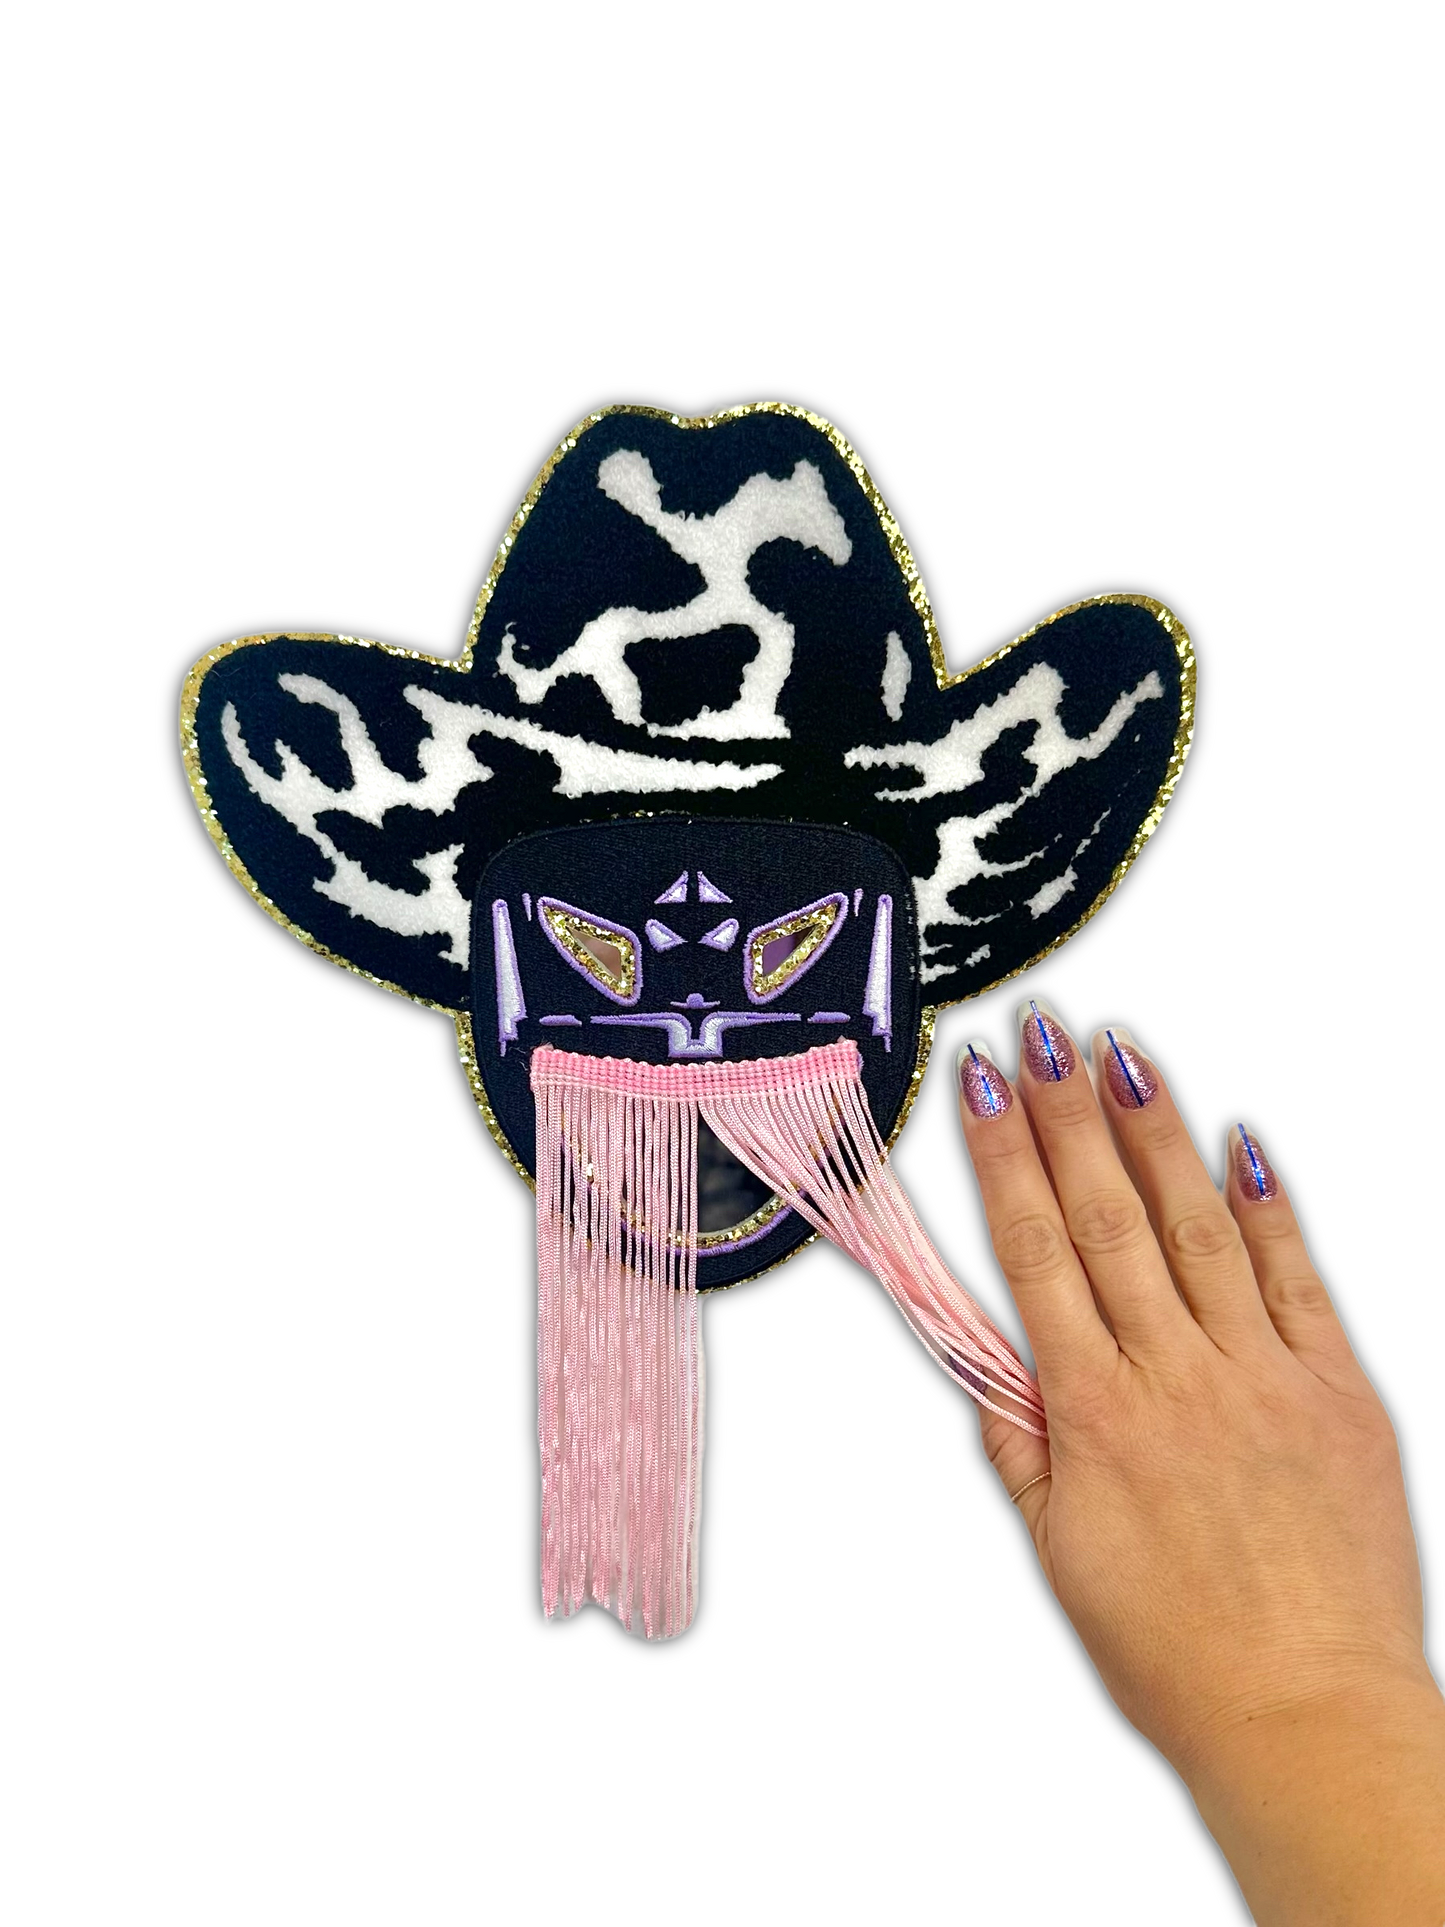 Orville Peck Mini Mirror with Fringe & Glitter by Chrissy Crater Moon Soft Goods